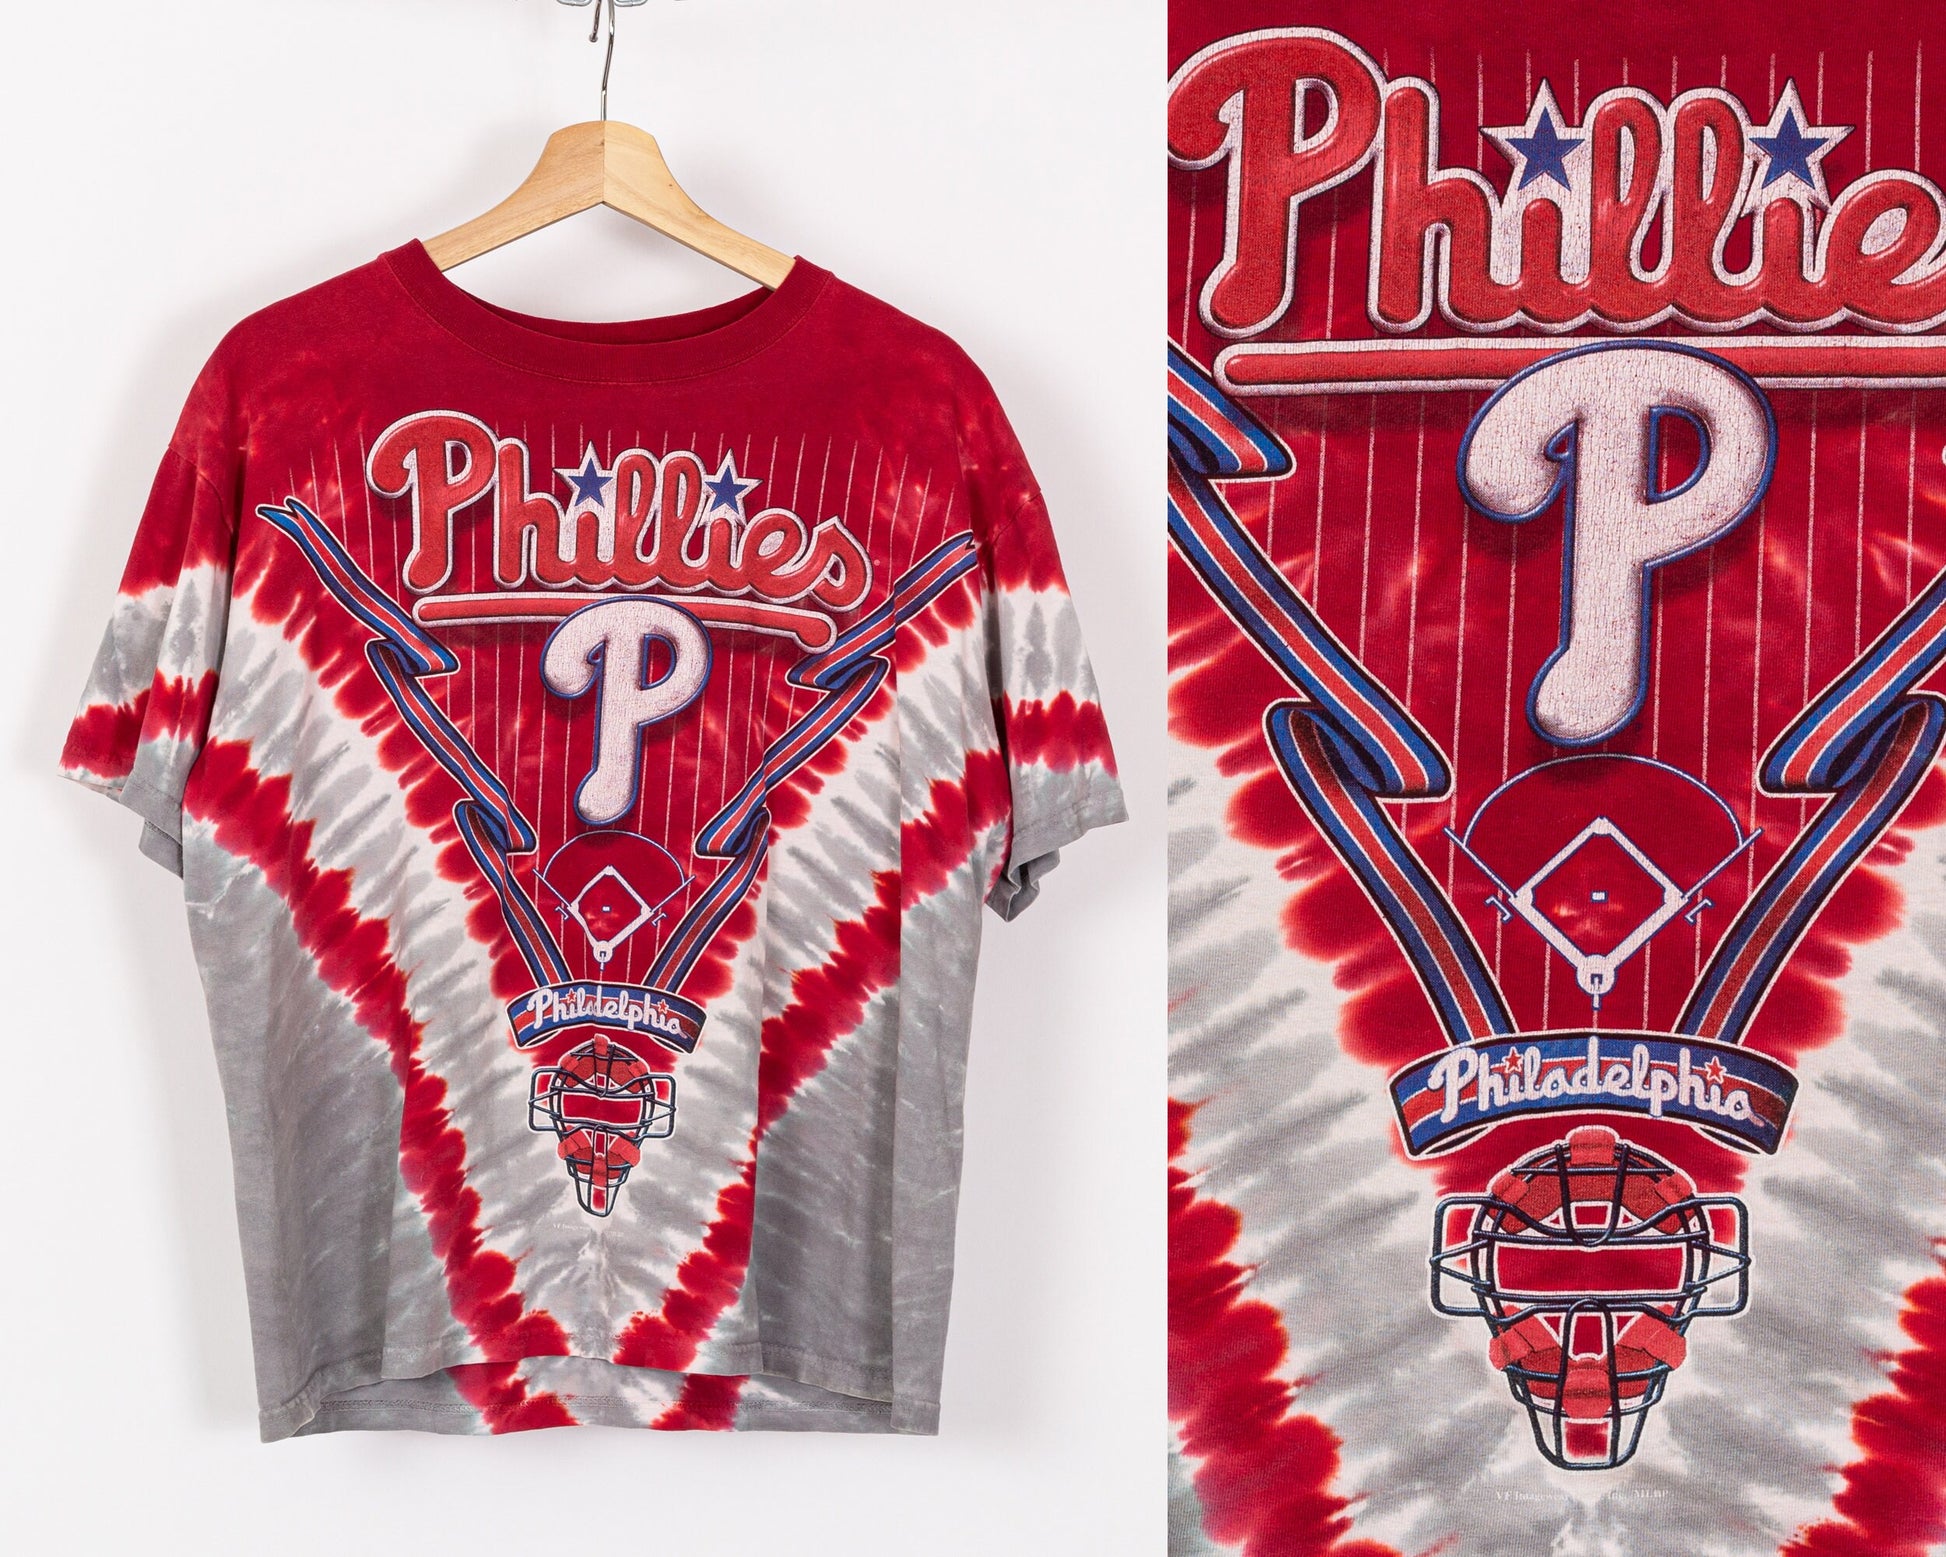 Phillies and Reds Will Wear 1990s Throwback Uniforms on Wednesday